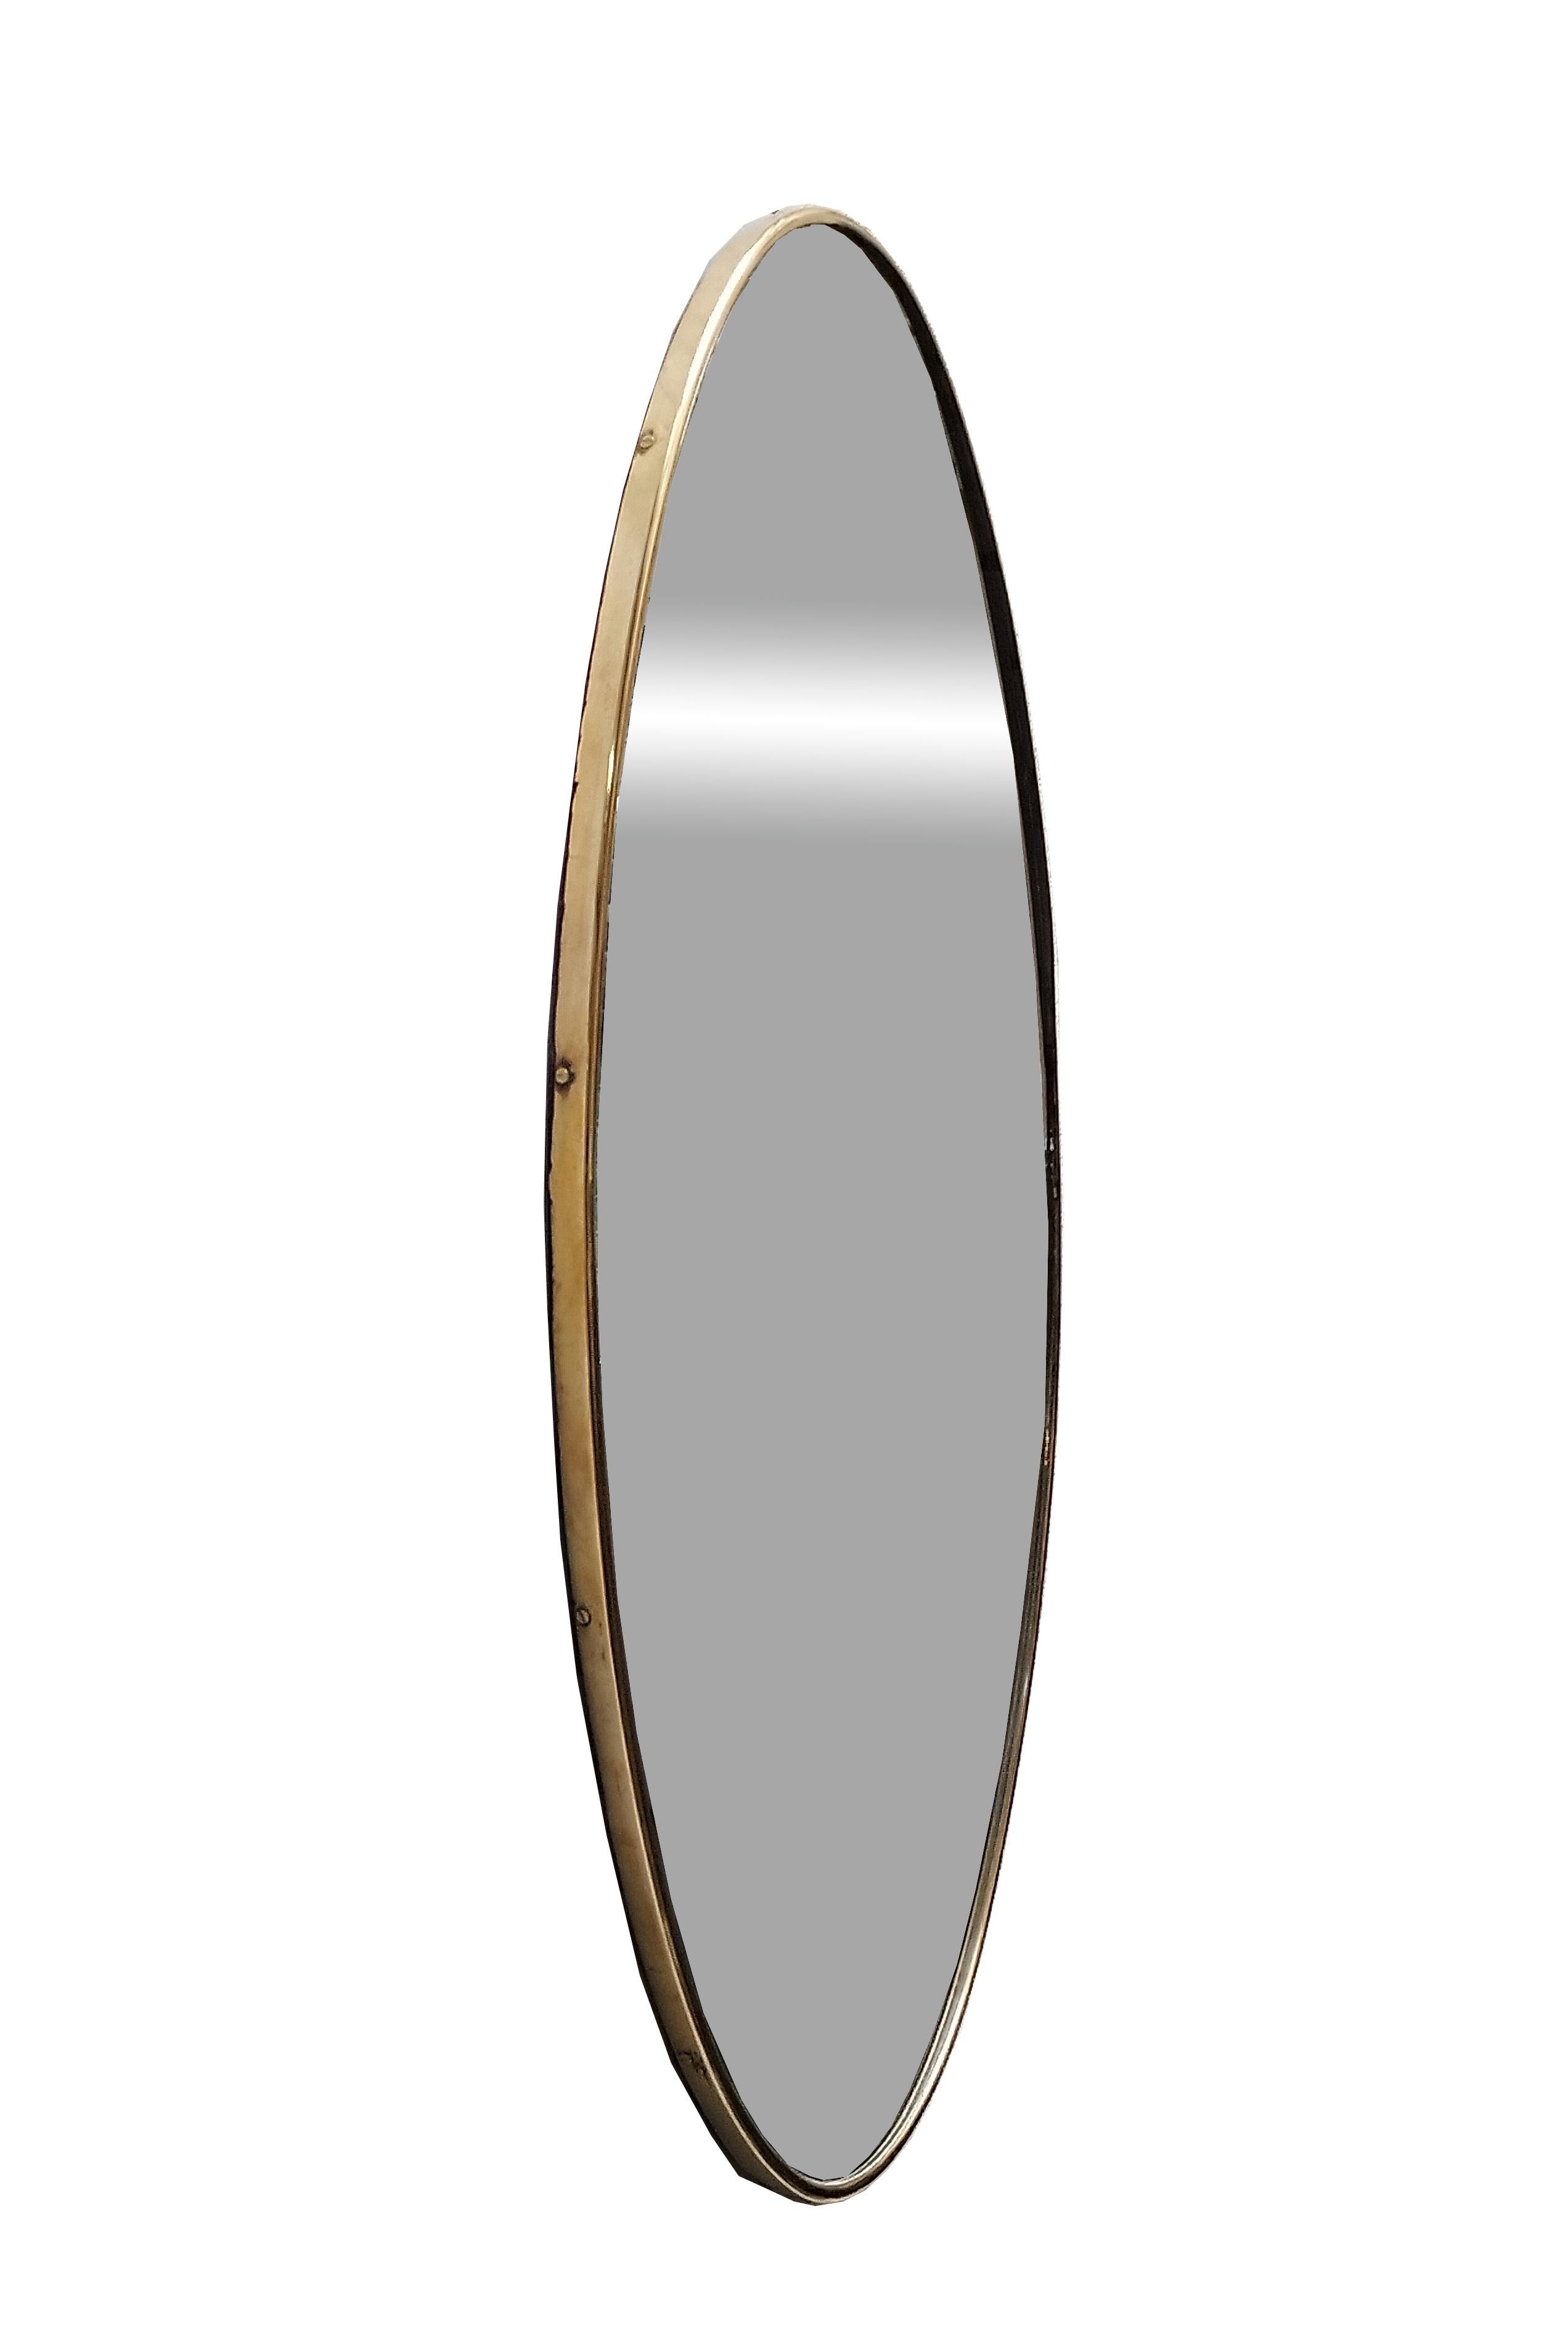 Mid-century Italian wall mirror with brass frame.  The oval shape is rare in this style of mirror. It is in fair vintage condition, with a characteristic aged patina on the brass frame. 
